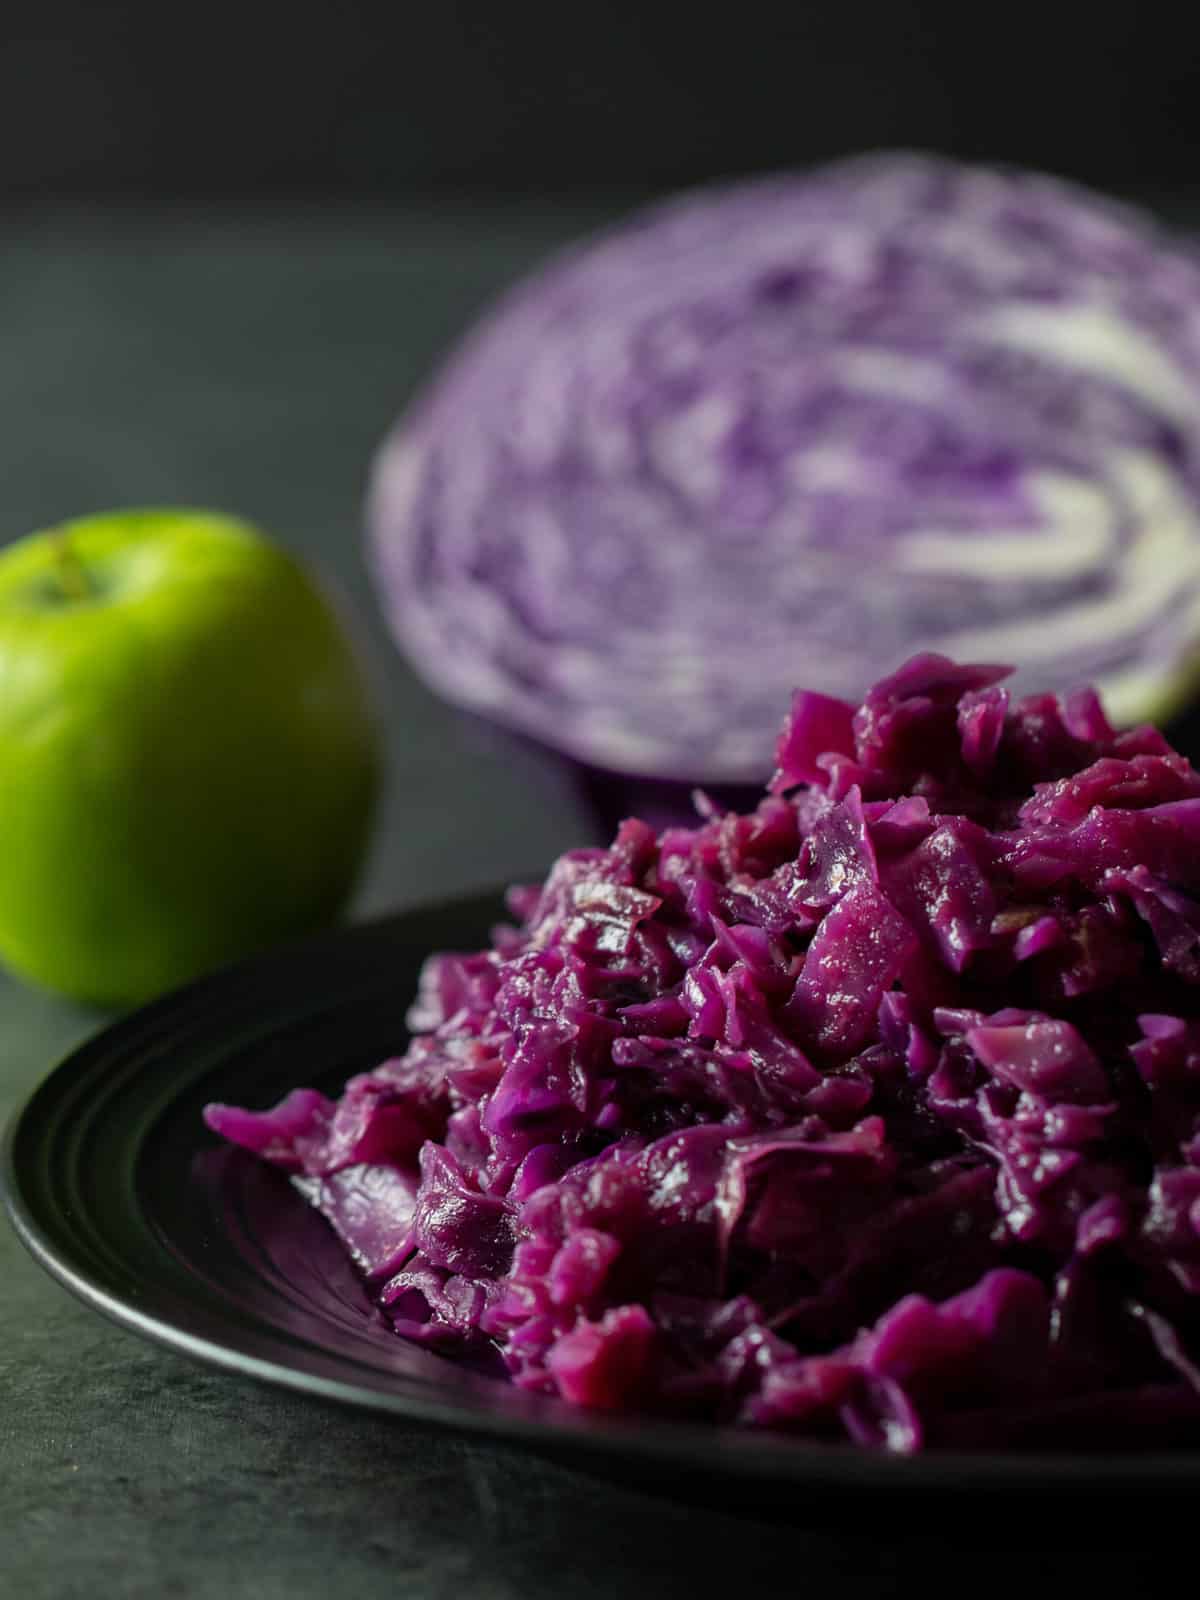 Braised Red Cabbage and Apples Recipe - The Black Peppercorn